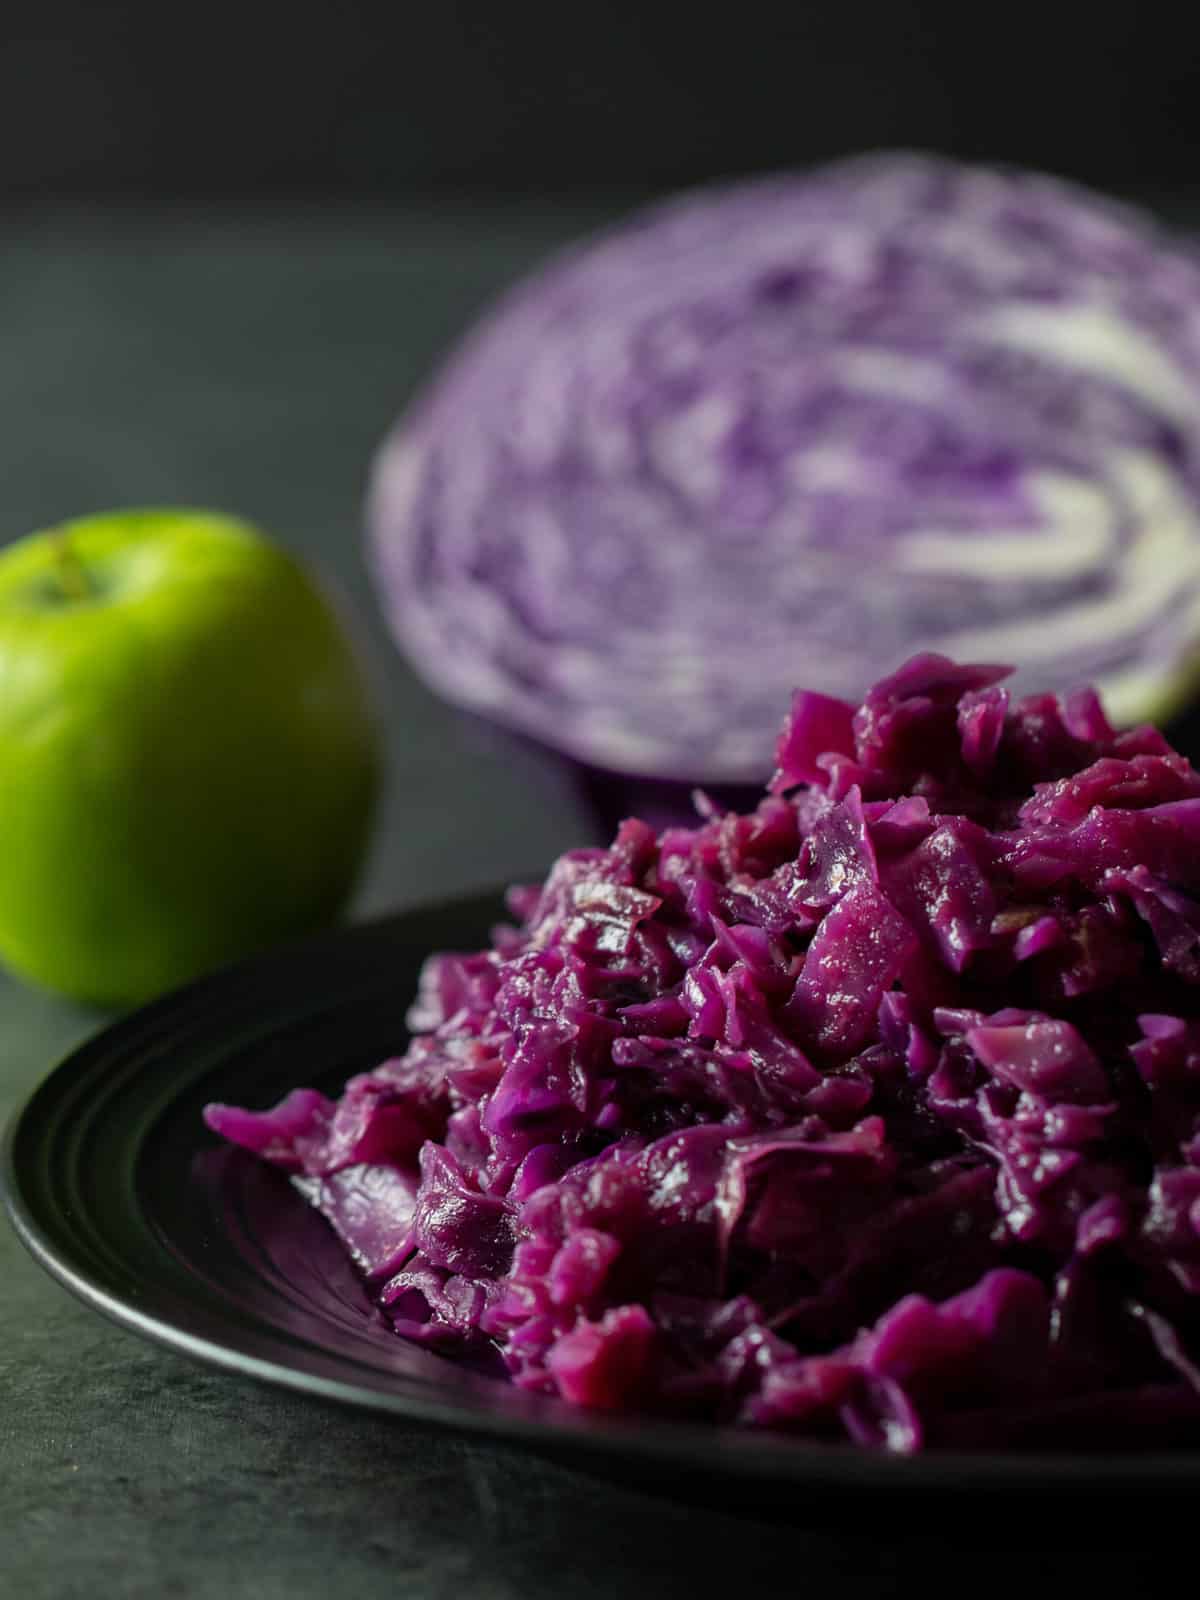 Braised Red Cabbage and Apples Recipe - The Black Peppercorn